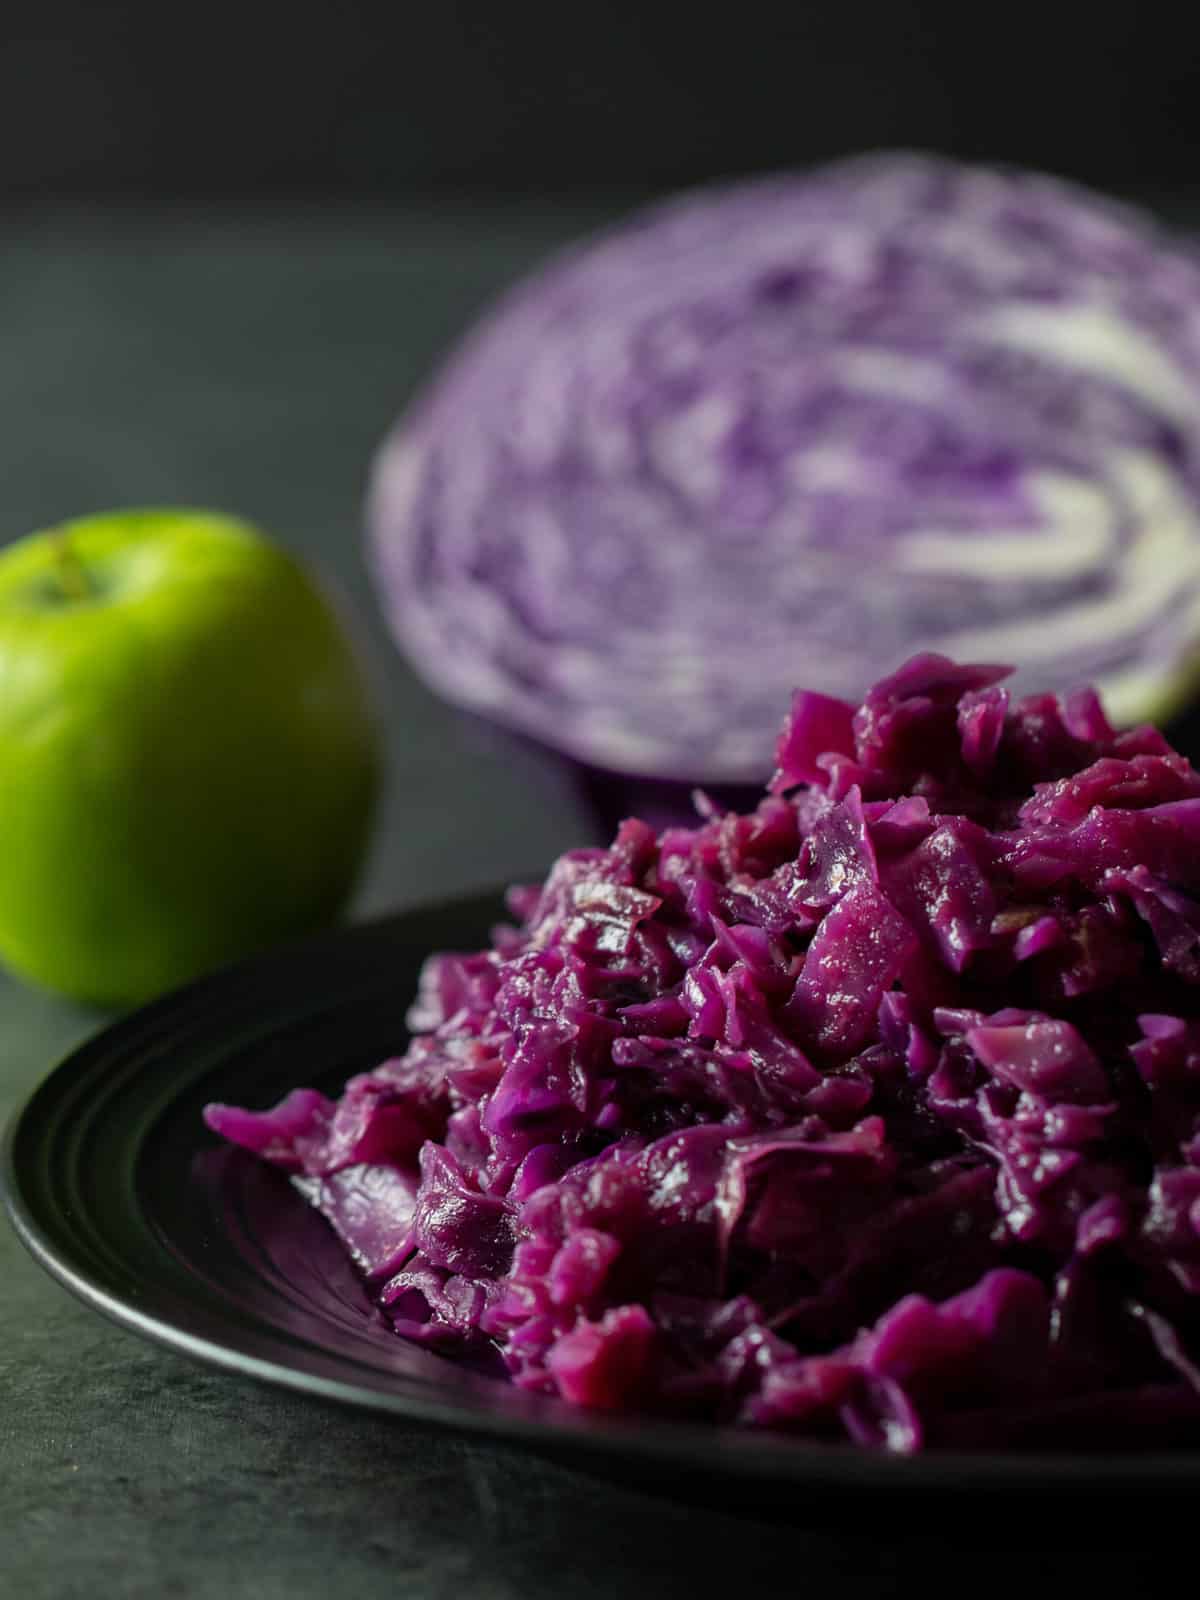 Braised Red Cabbage and Apples Recipe - The Black Peppercorn